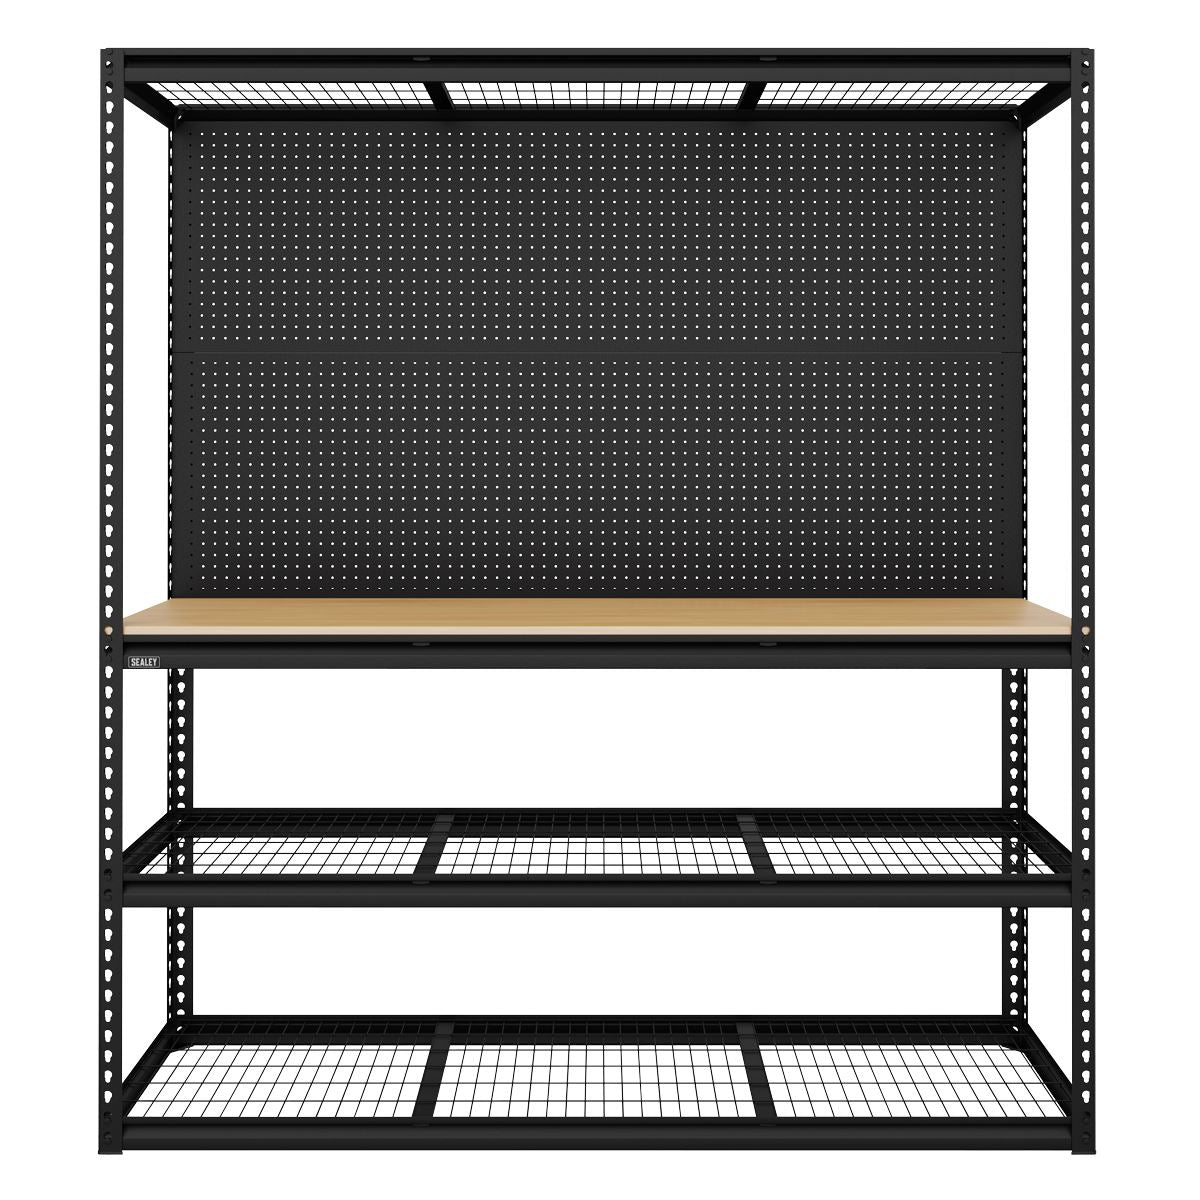 Sealey Heavy-Duty Modular Workbench with Racking & Pegboard 300kg Capacity Per Level 1820mm